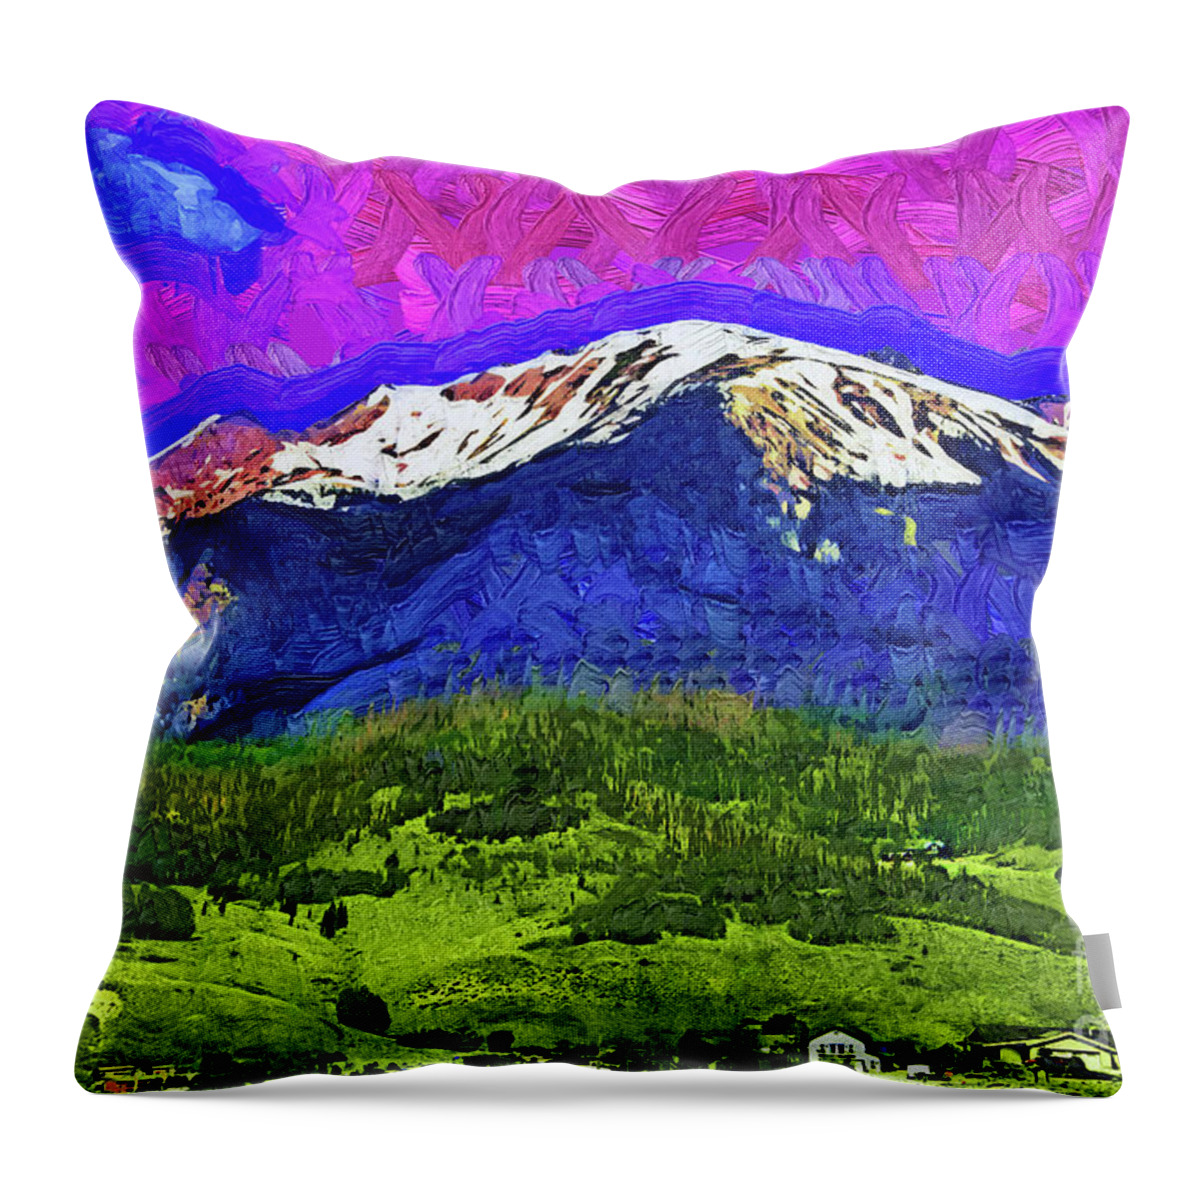 Colorado Throw Pillow featuring the digital art A Field, Forest And Snow Capped Mountains In Colorado by Kirt Tisdale